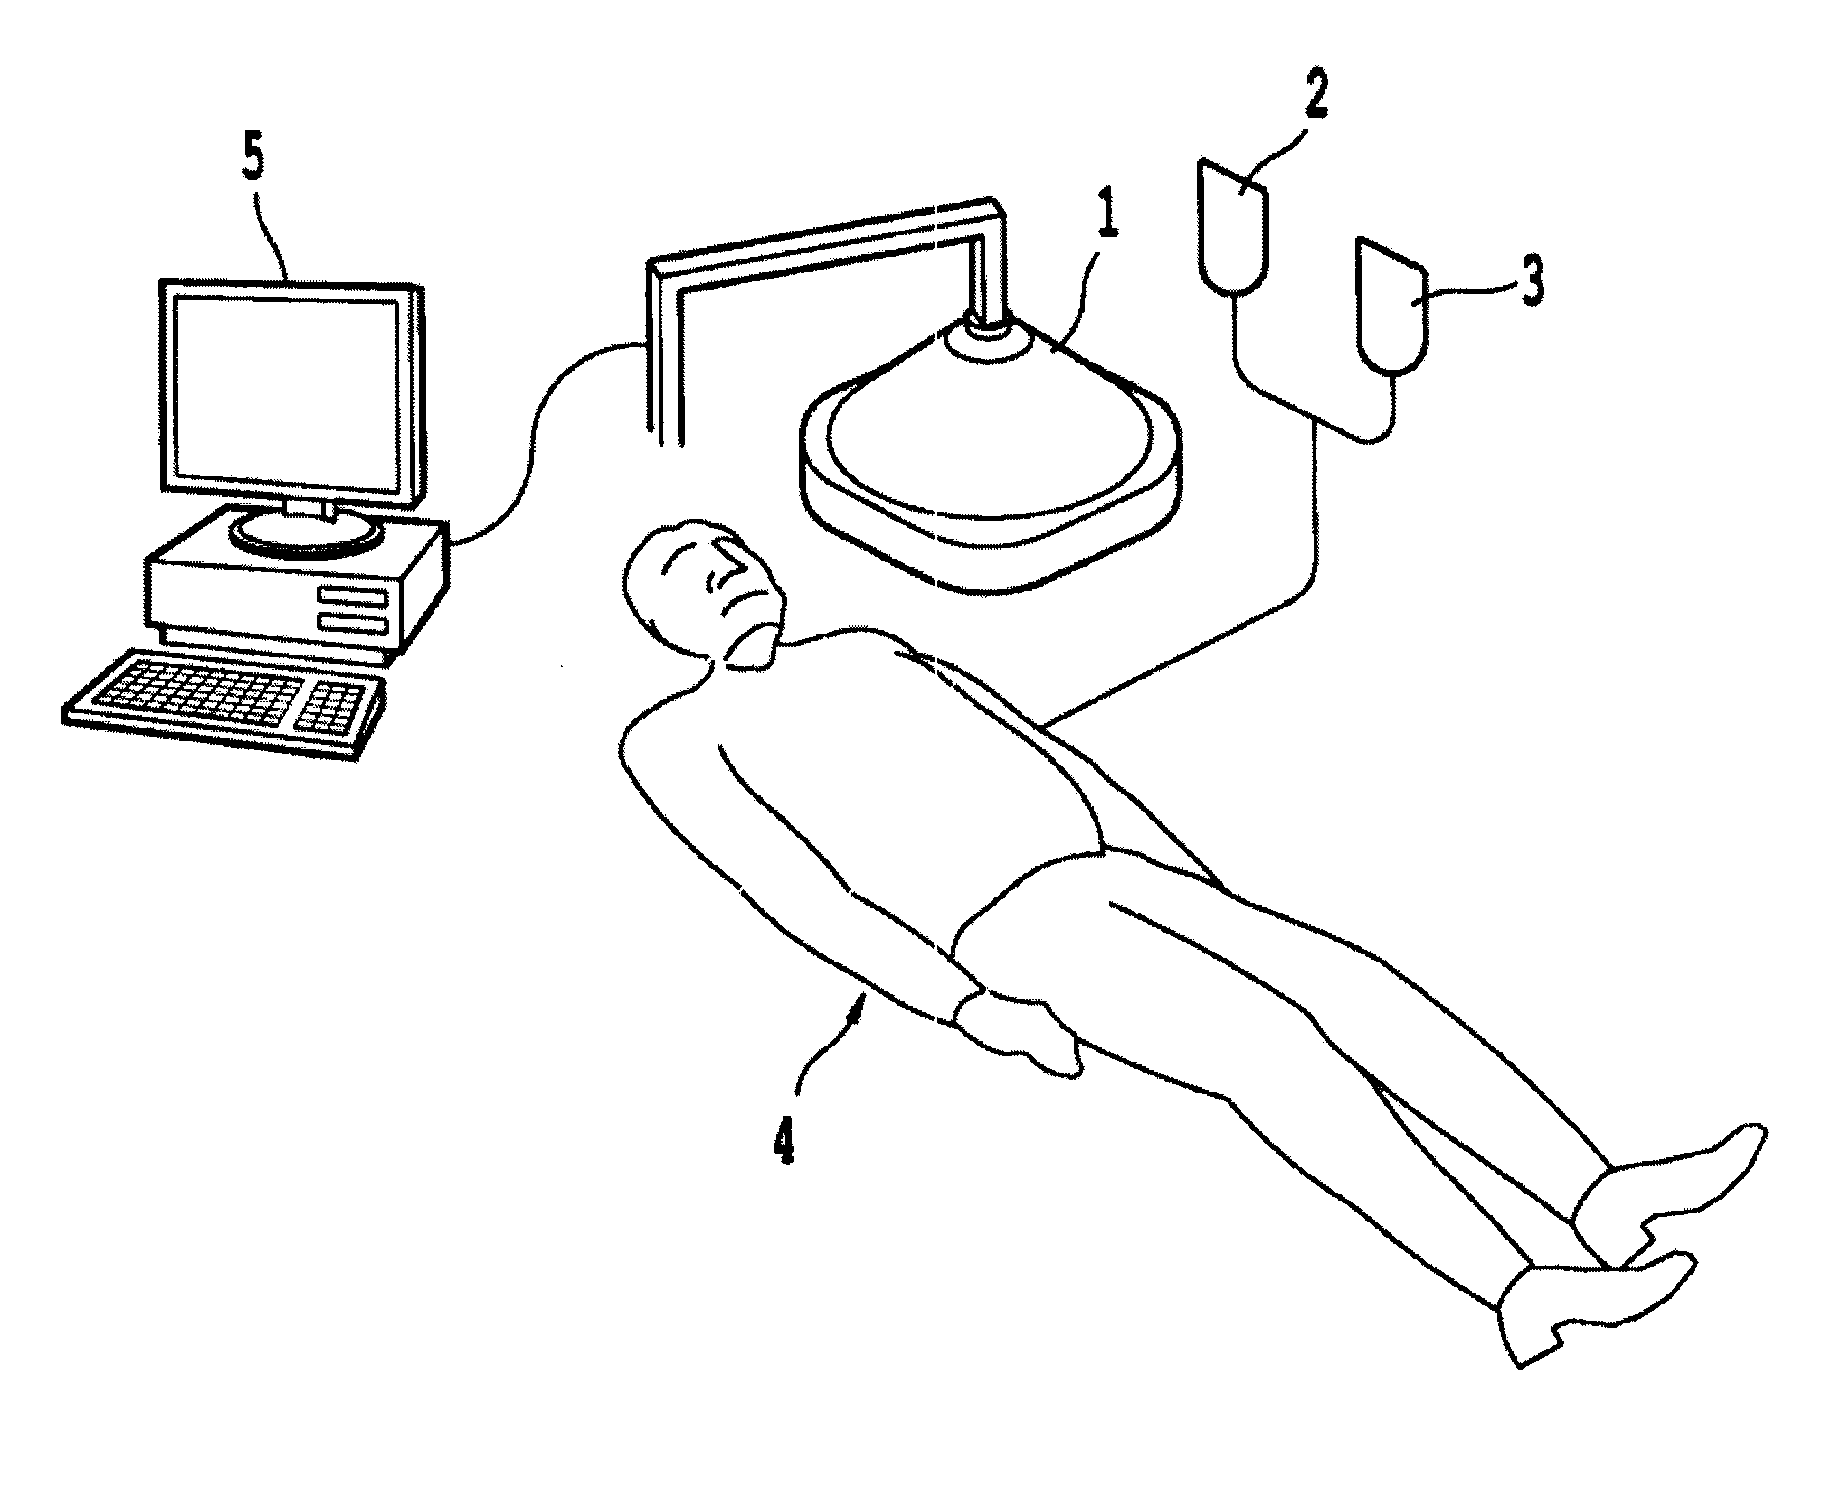 Non-invasive systems and methods for in-situ photobiomodulation